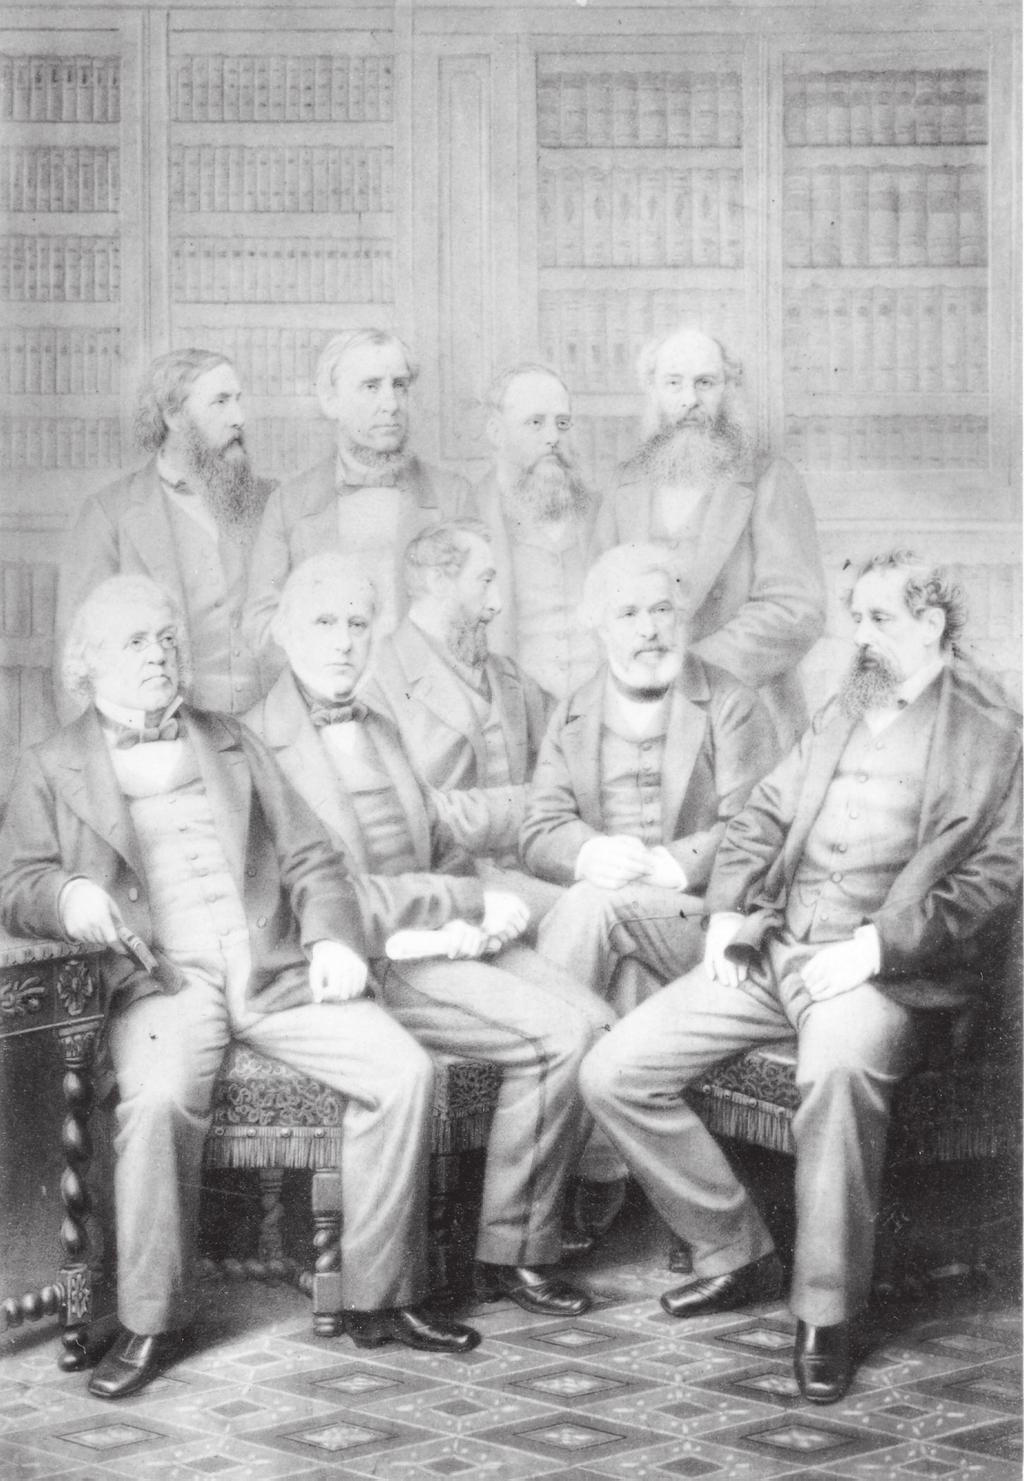 Some of the authors whose works Morris Parrish collected. Seated: William Makepeace Thackeray, Thomas Macauley, Edward Bulwer-Lytton, Thomas Carlyle, and Charles Dickens.